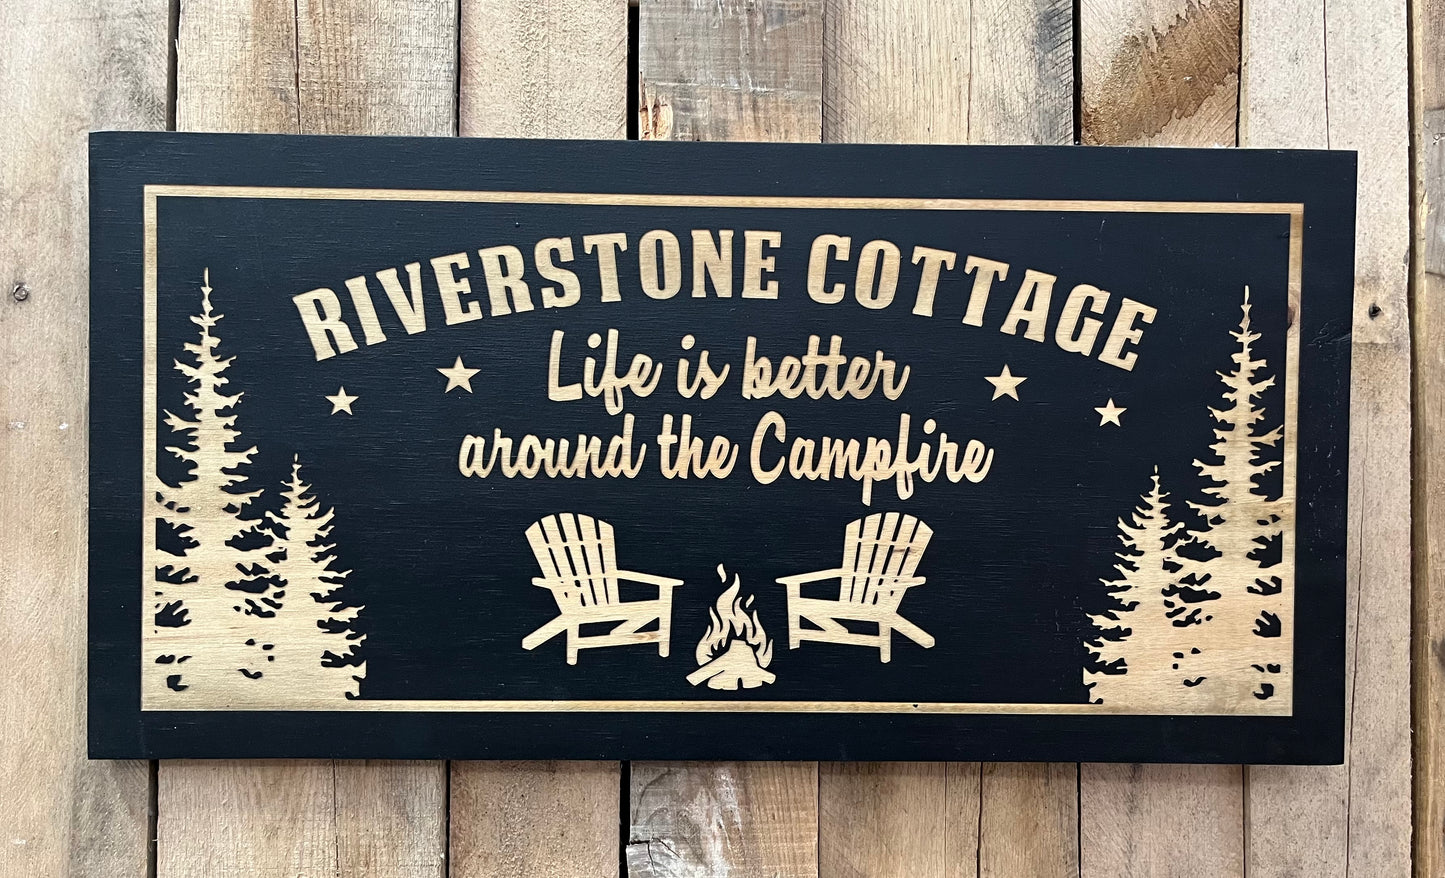 12” x 24” Black Wood Sign - Life is better around the campfire